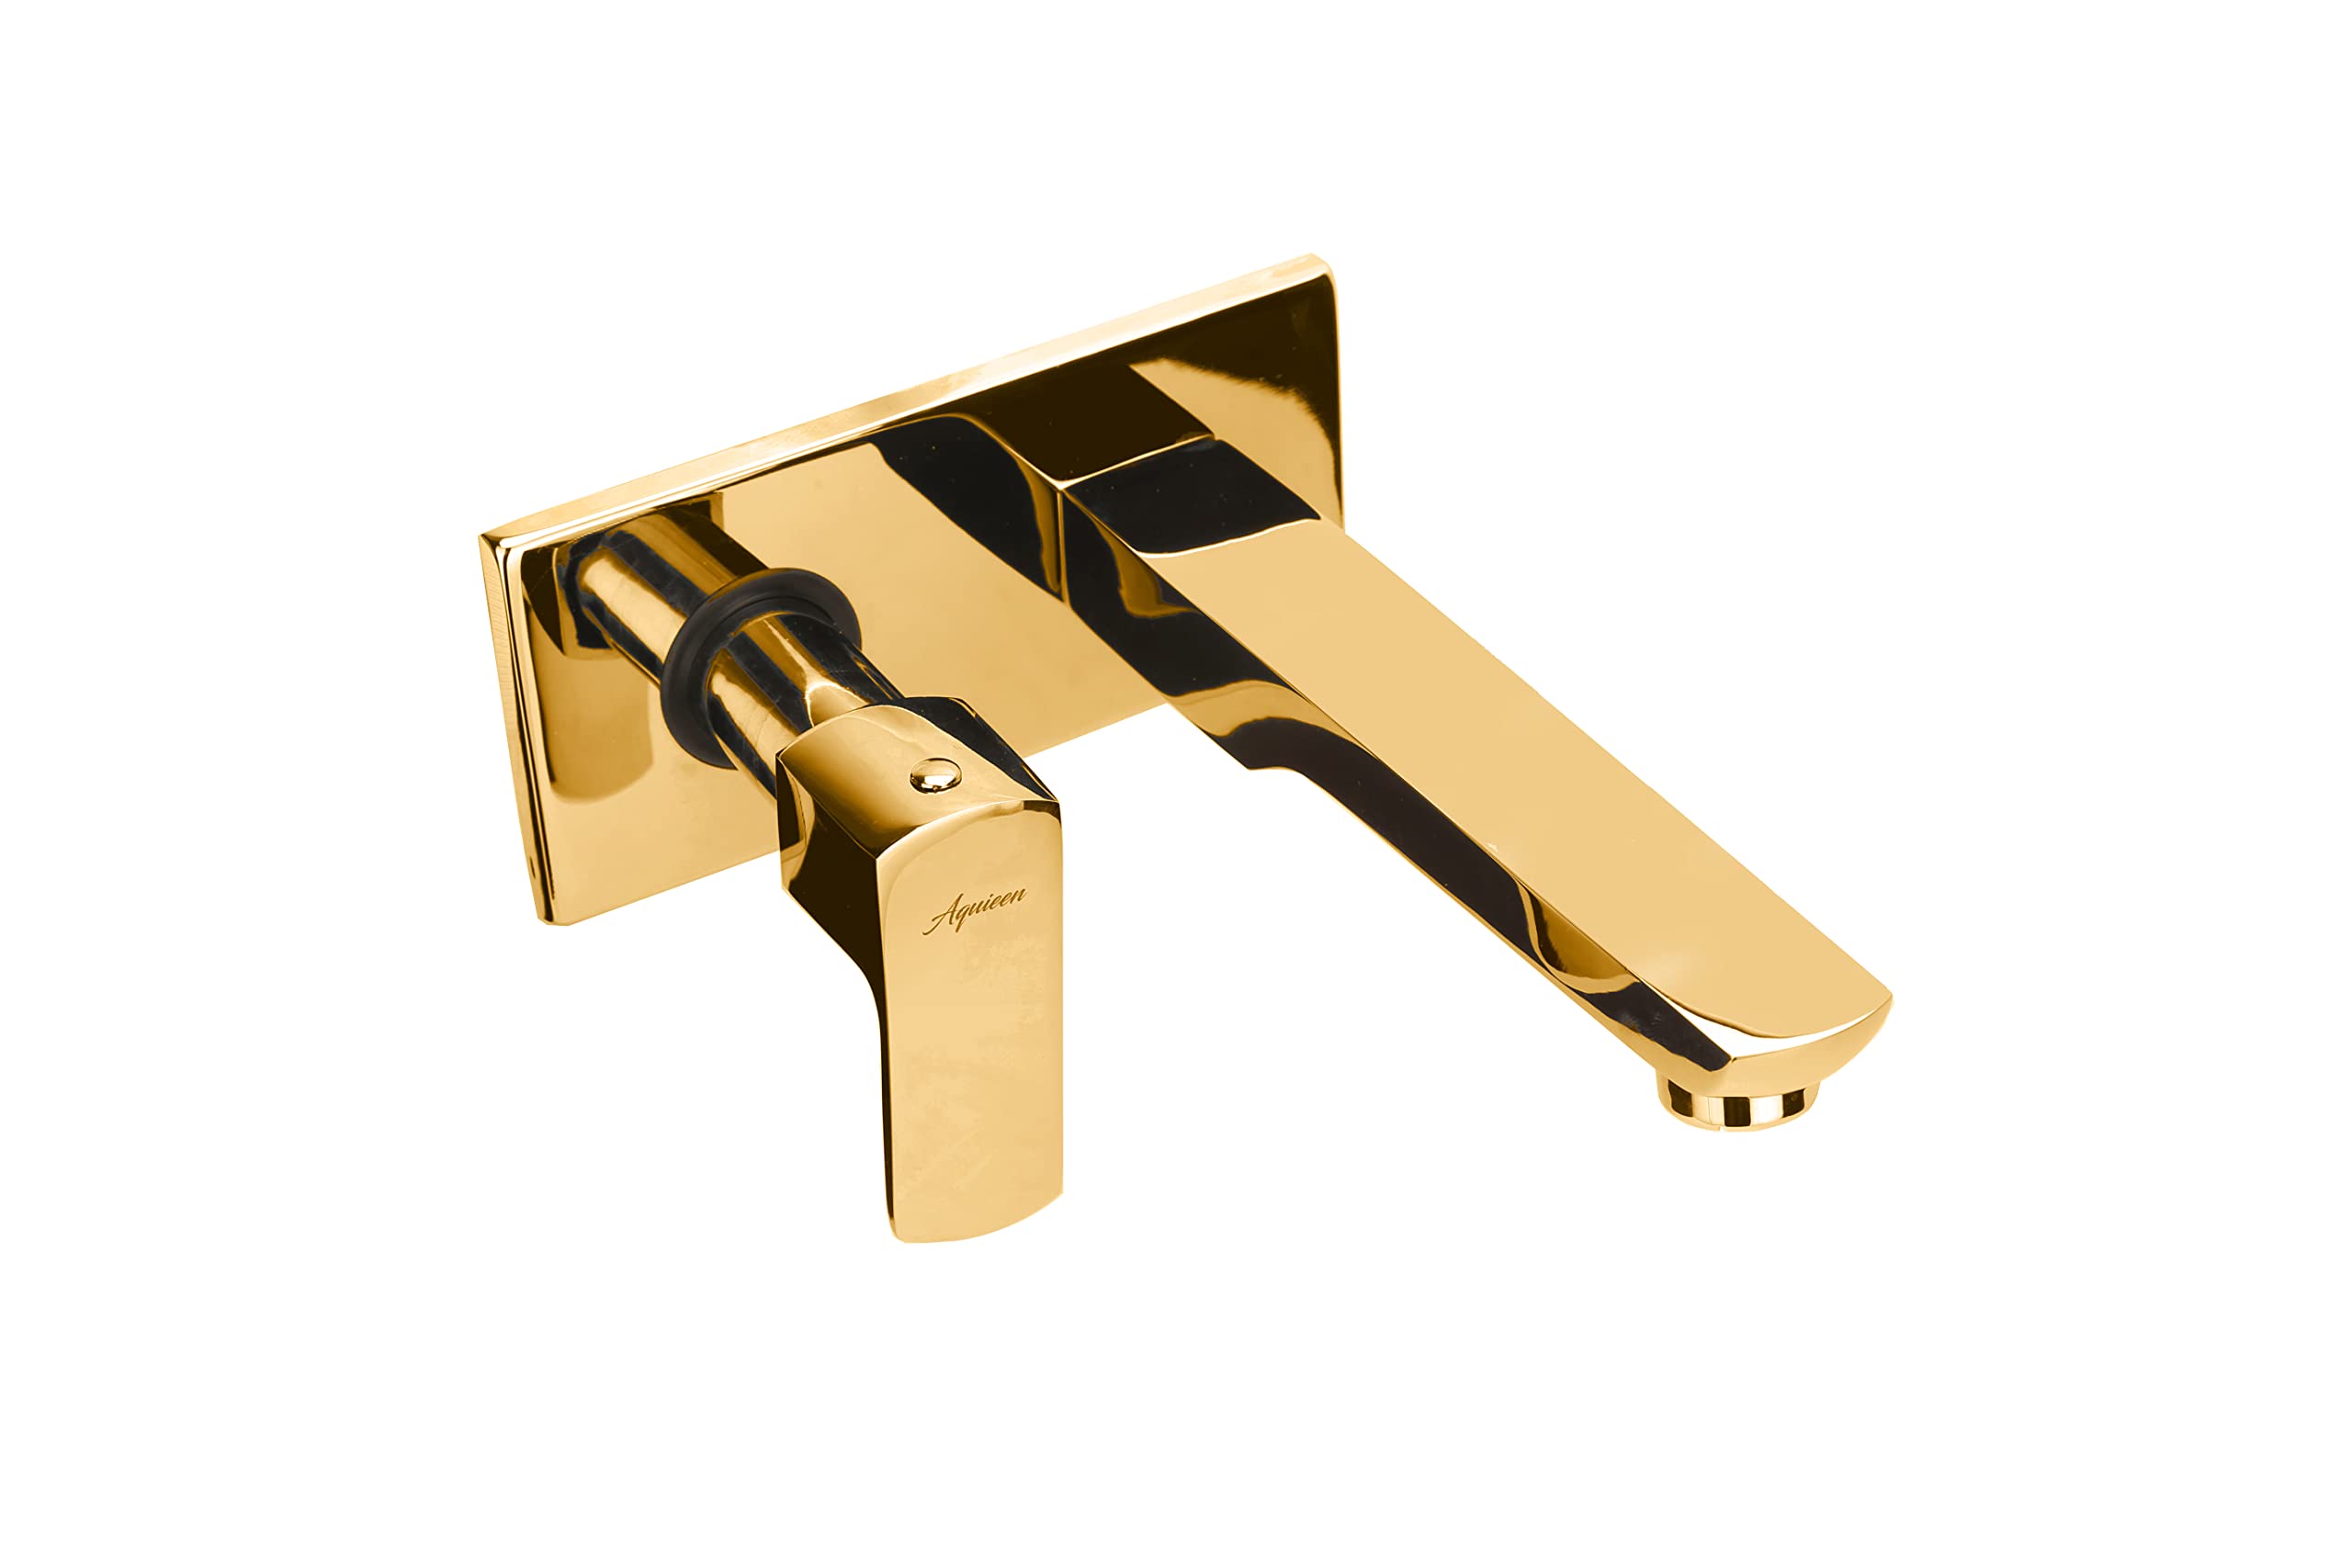 Aquieen Luxury Series Wall Mounted Basin Pillar Tap with Provision for Cold Water (Zura - PVD Gold)